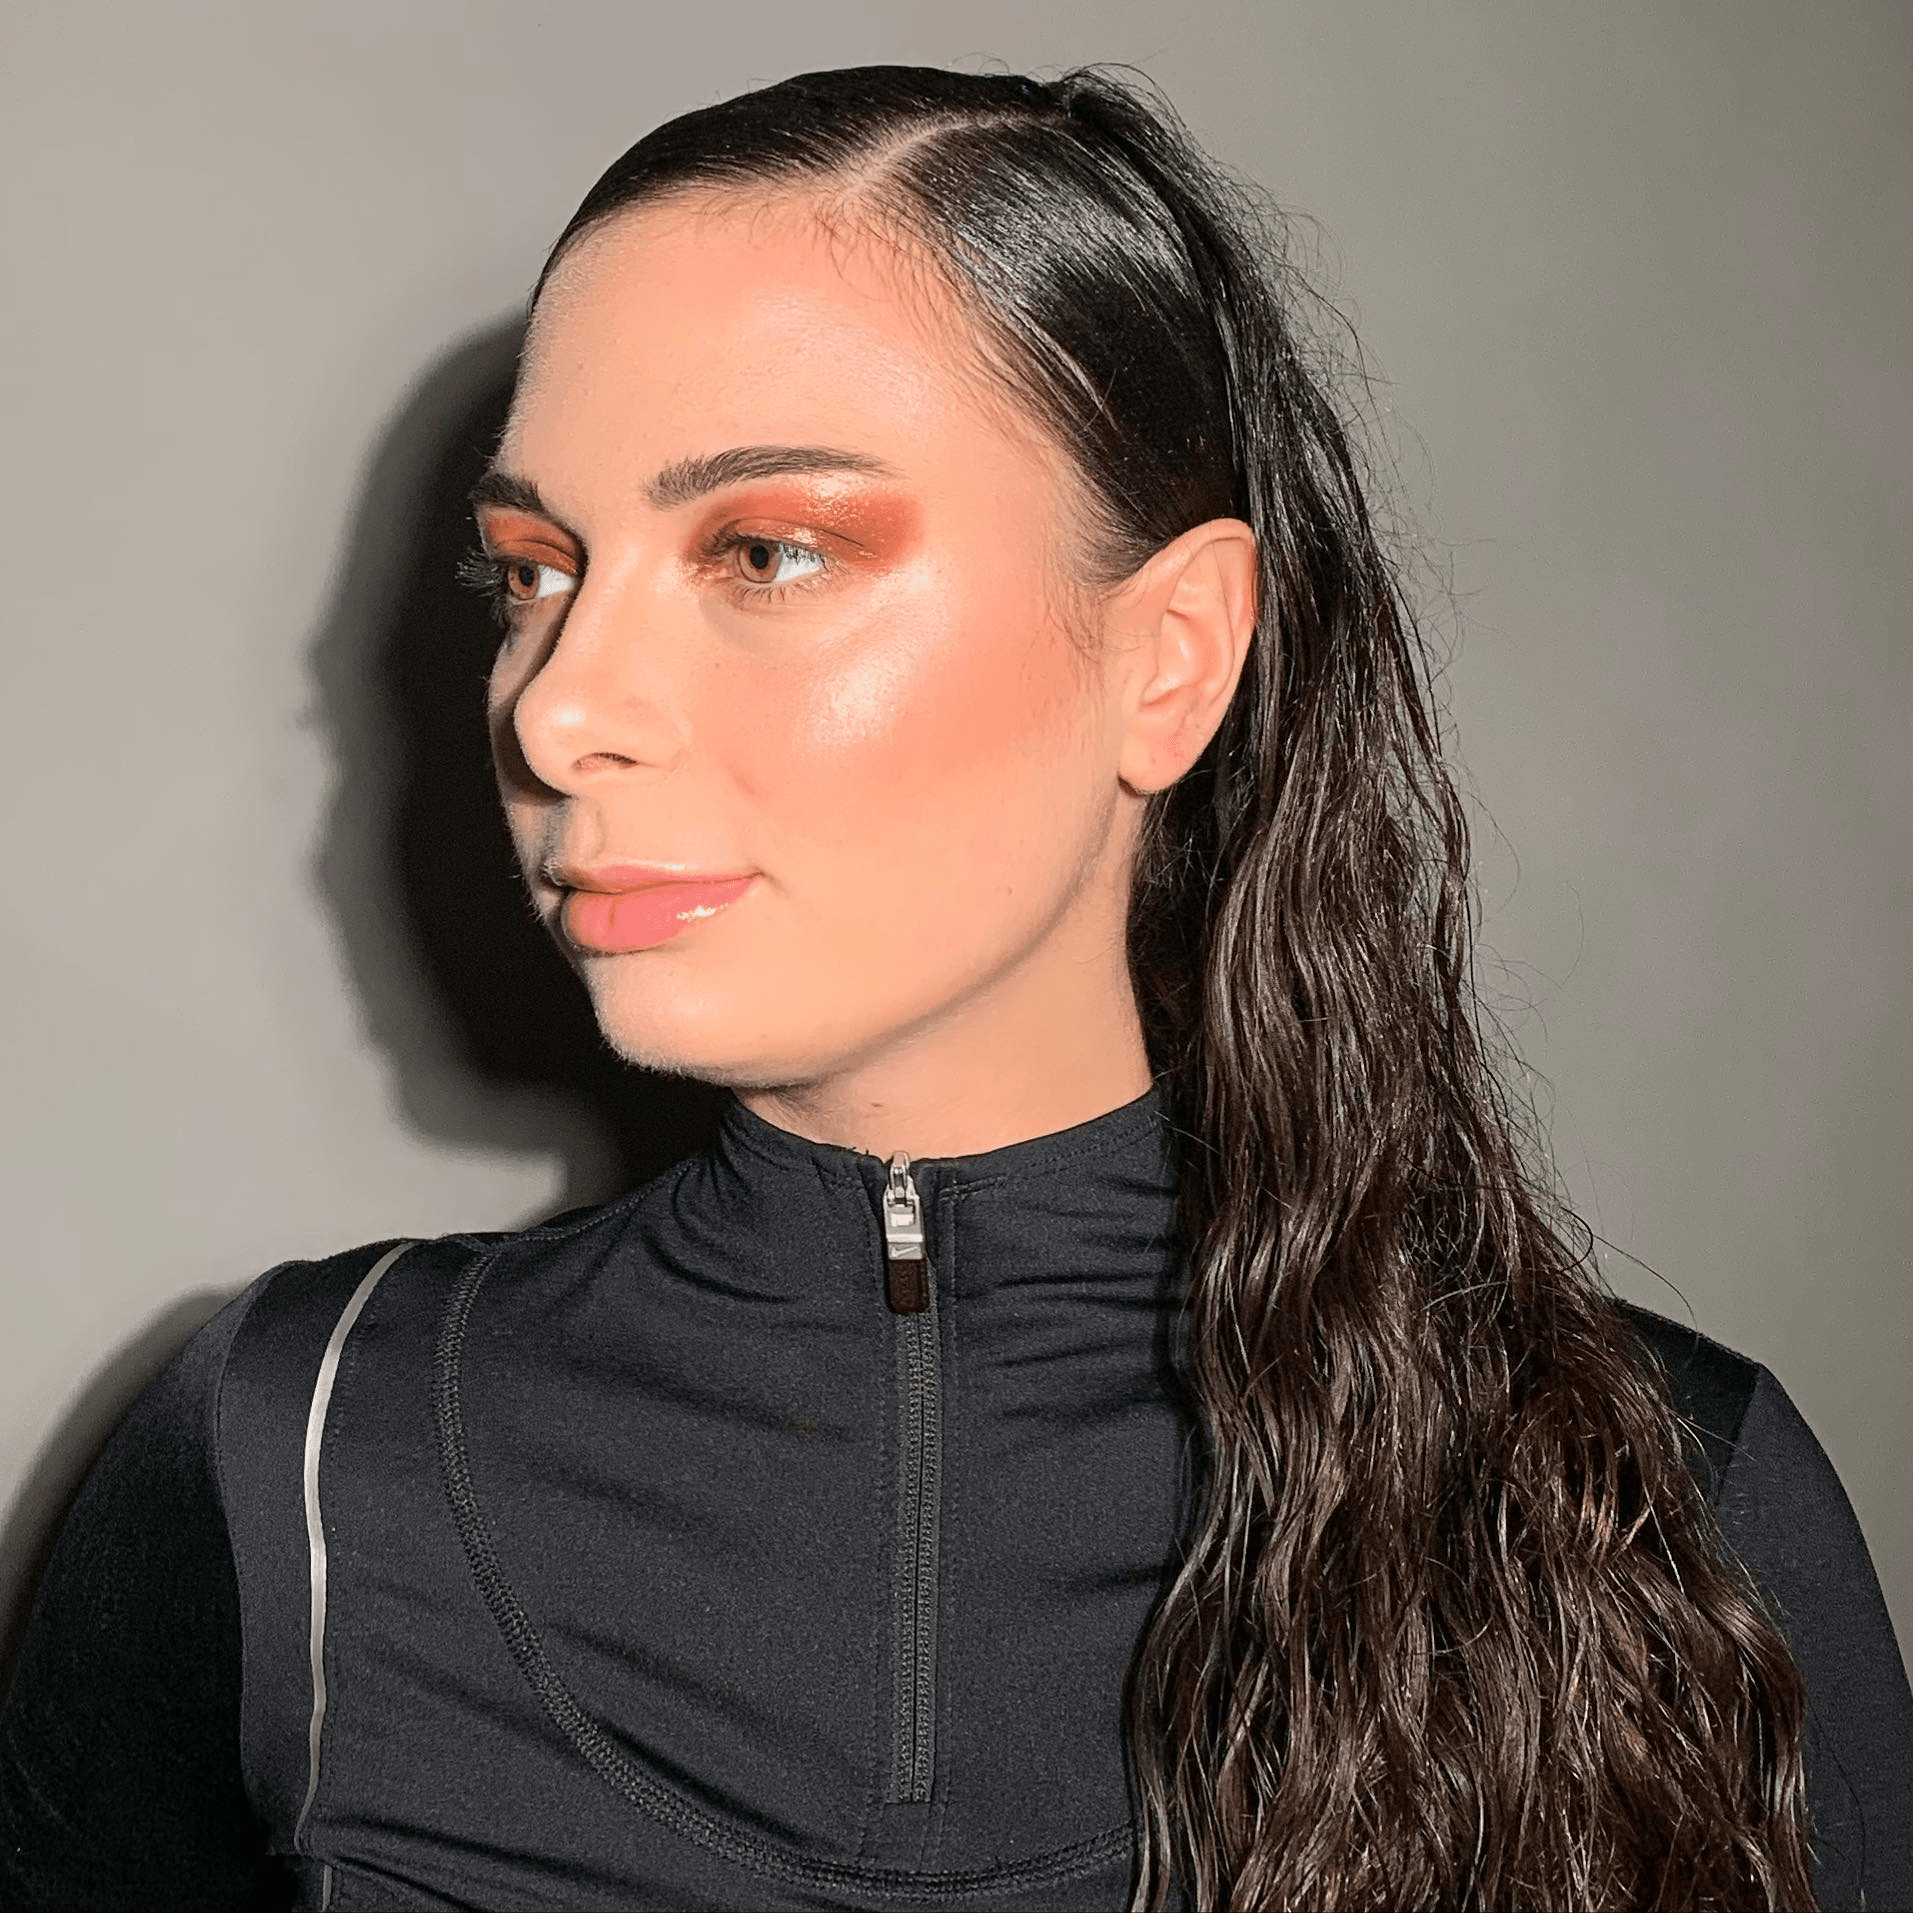 Glossy Waves of Confidence